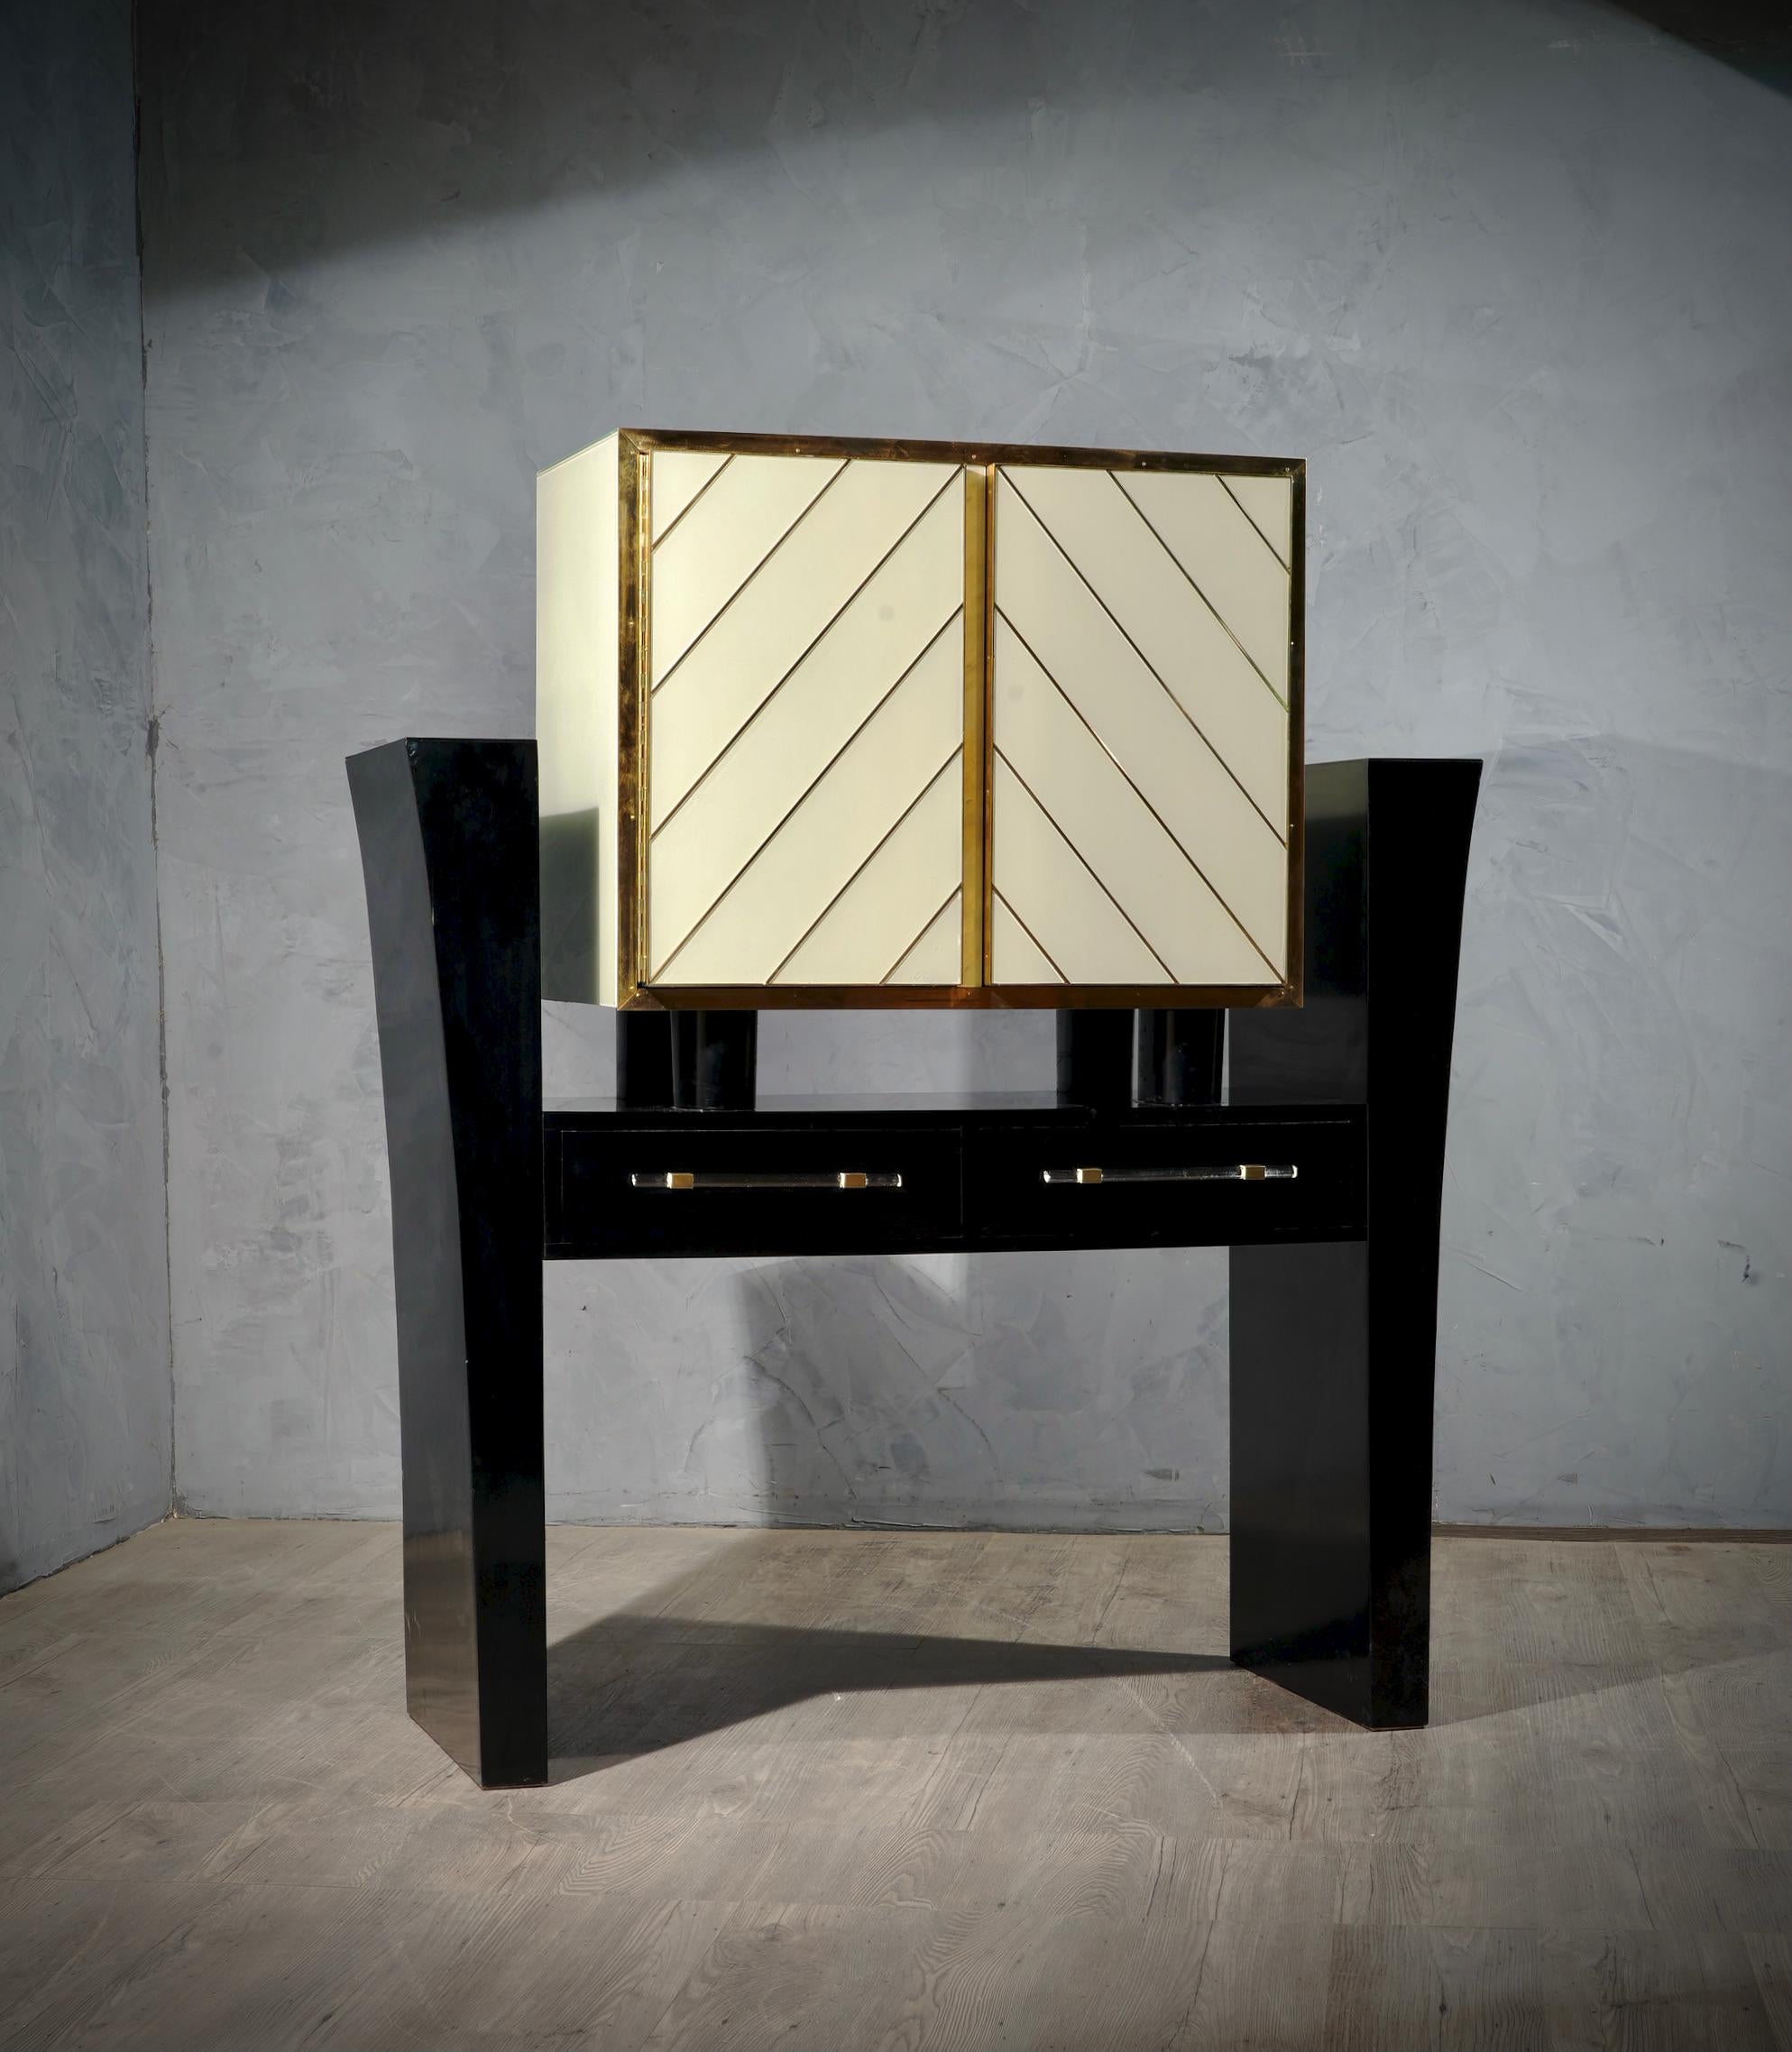 Amazing bar cabinet with an incredibly sophisticated design with an incredible use of materials, glass, brass and mirror. Gorgeous color.

The bar cabinet consists of two parts:
- The body is made up of a wooden structure and a cream-colored glass